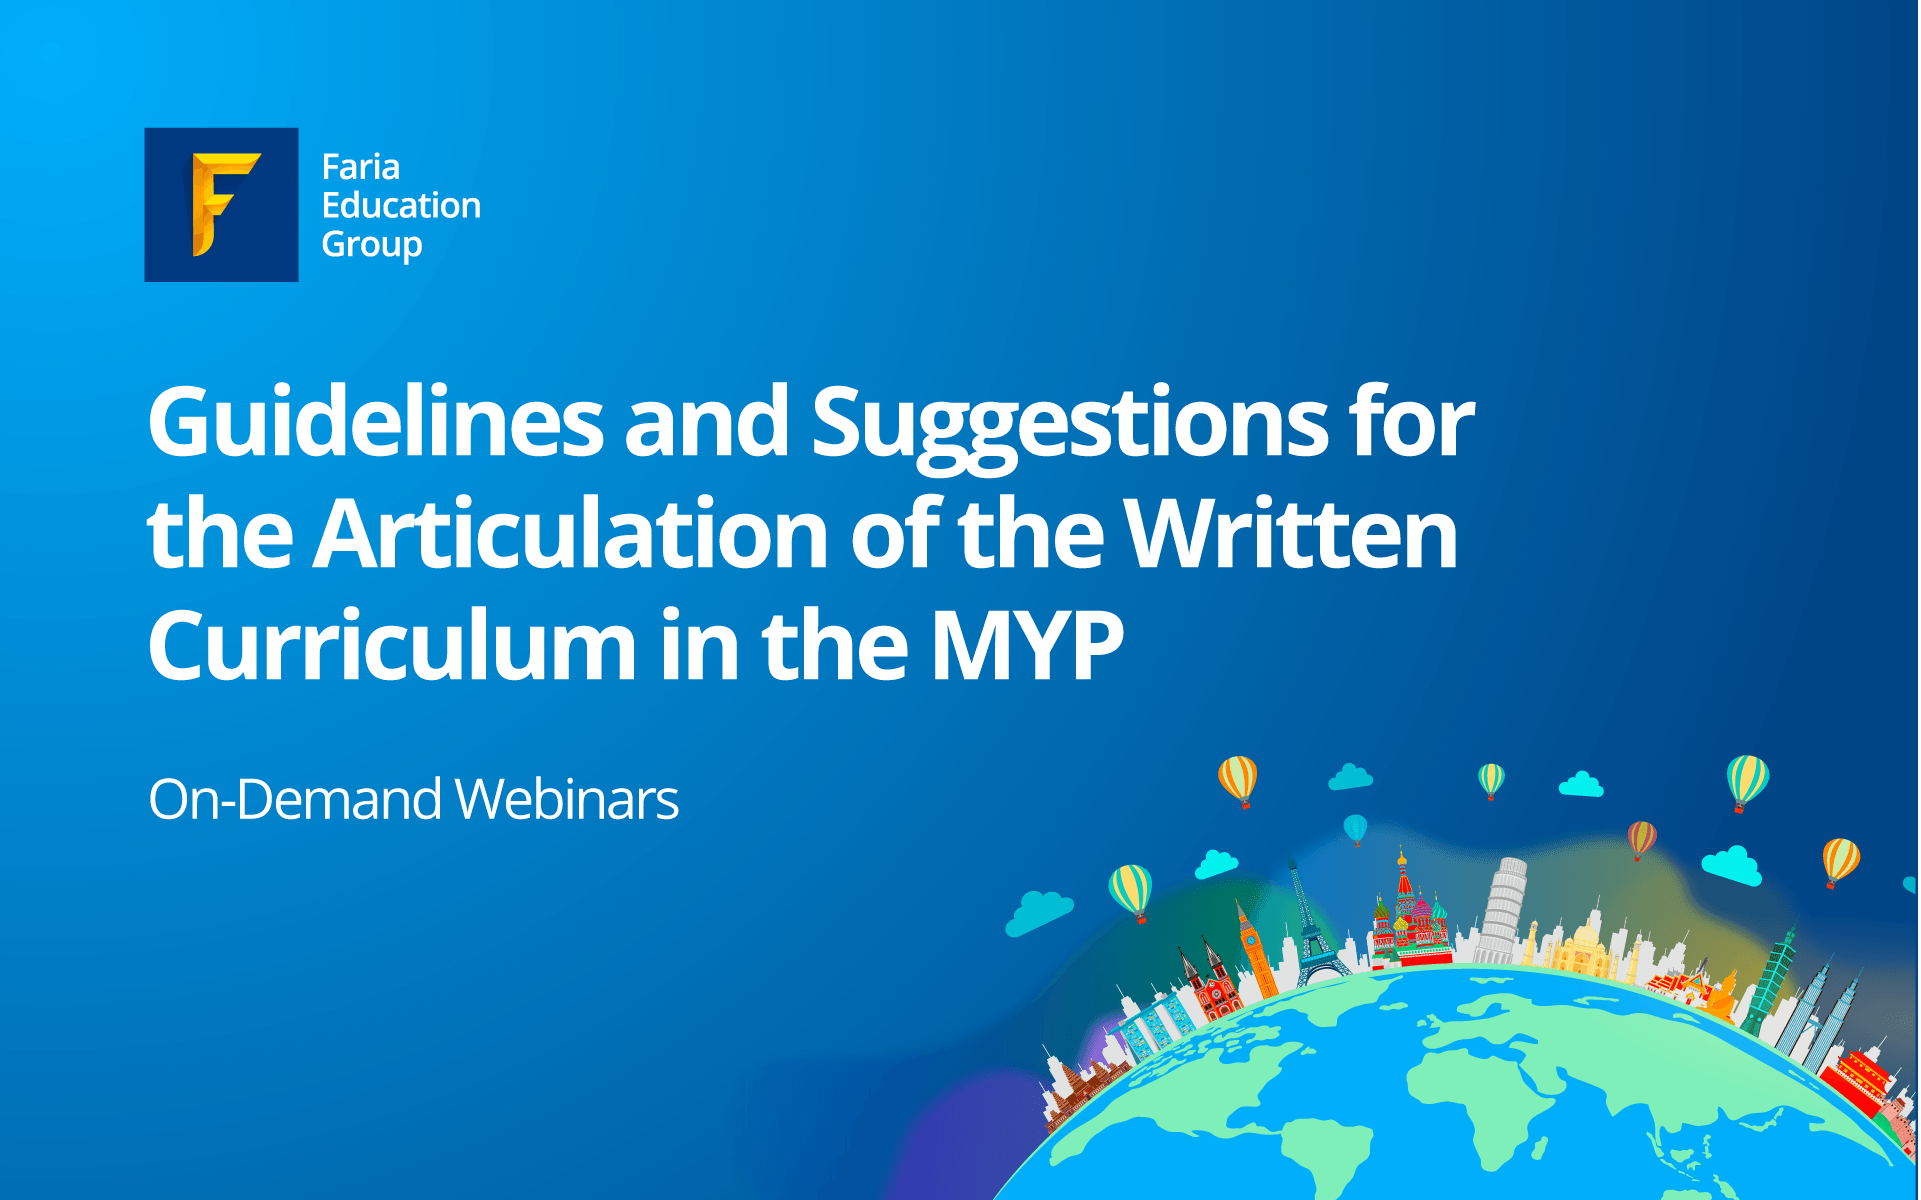 Guidelines and Suggestions for the Articulation of the Written Curriculum in the MYP